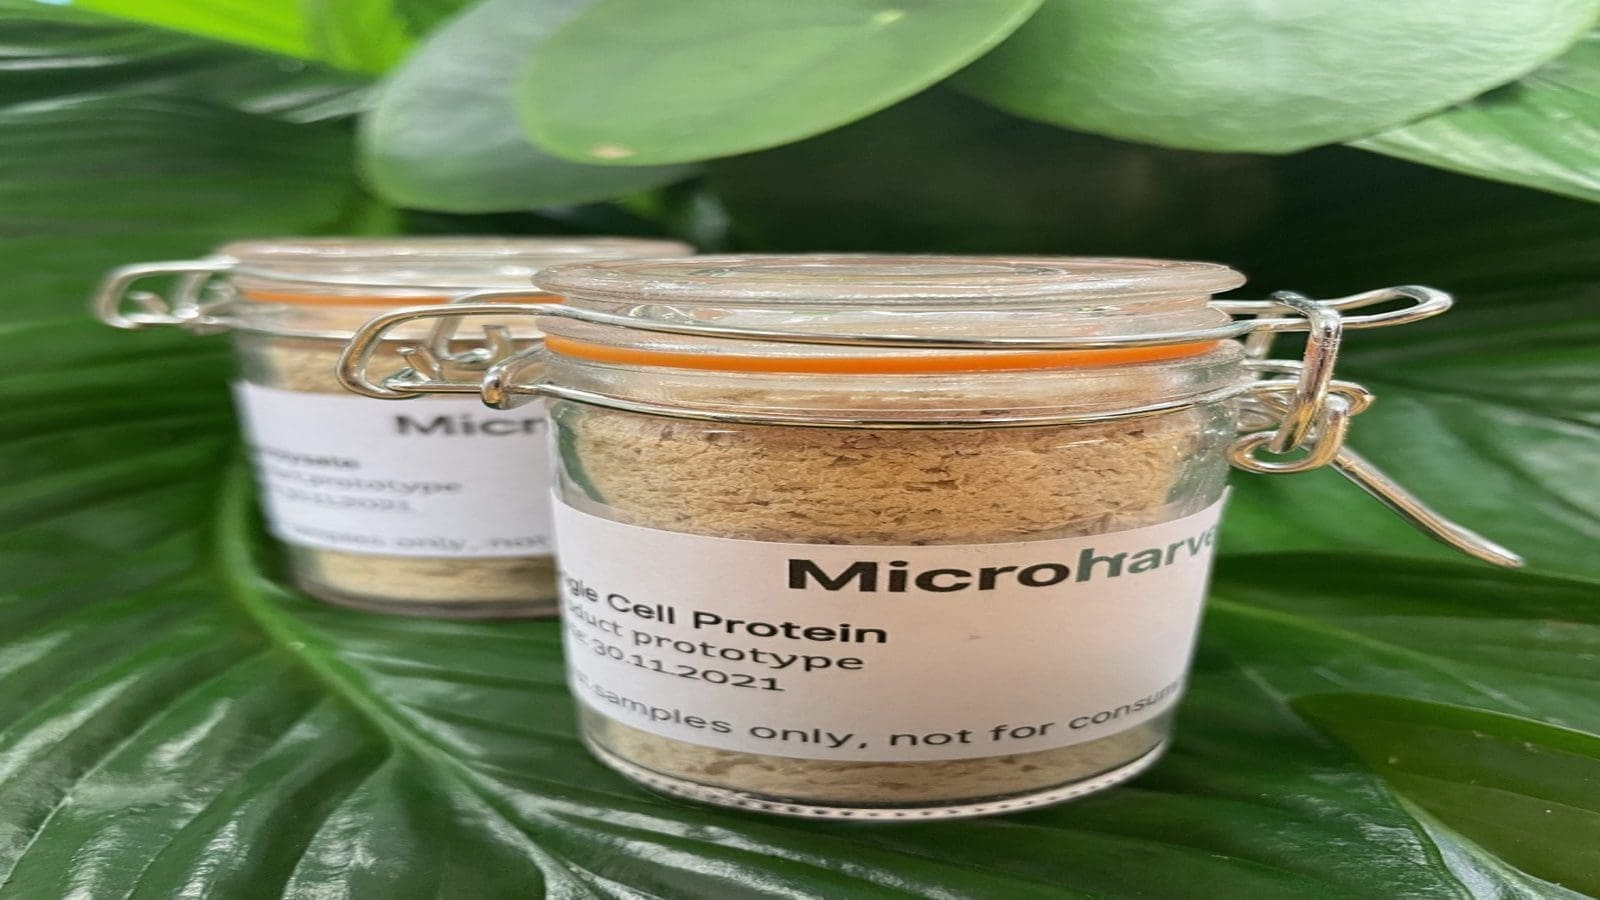 MicroHarvest secures US$8.2m to scale protein production